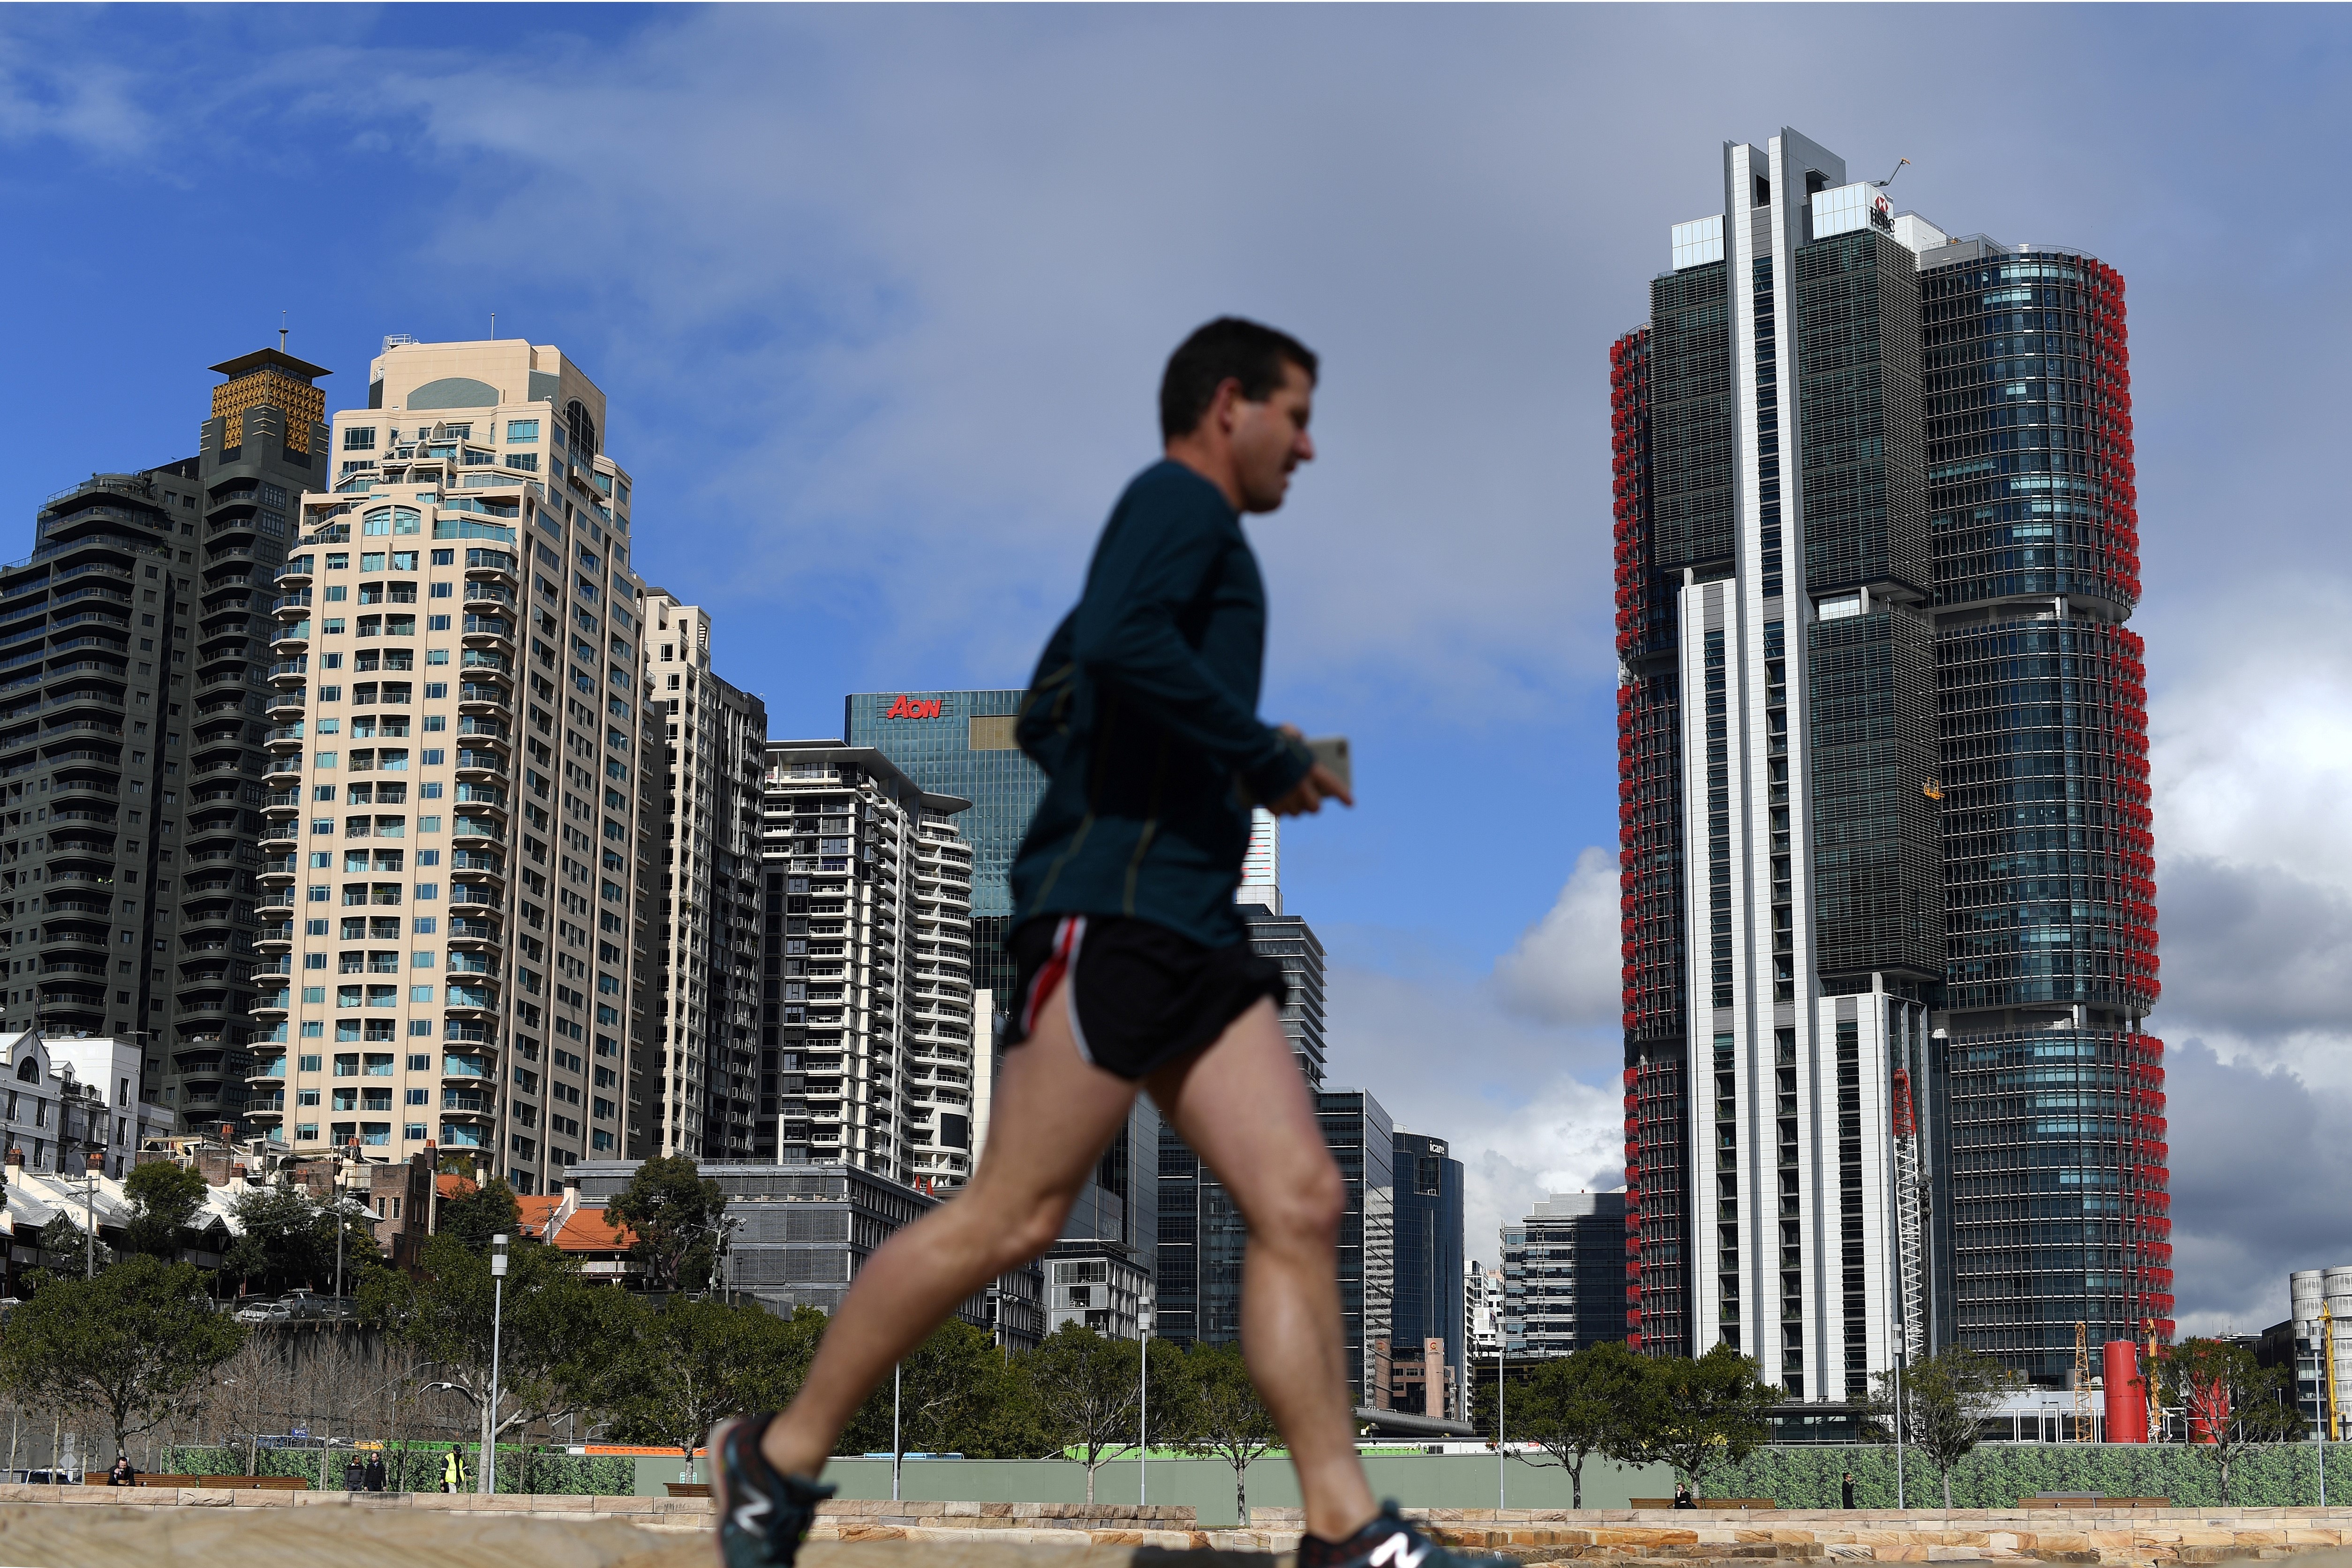 The Australian Competition and Consumer Commission said on Wednesday ‘it has decided to oppose the proposed merger’ between Vodafone Hutchison Australia and TPG Telecom. A jogger in front of newly constructed residential and commercial projects in Sydney. Photo: AFP